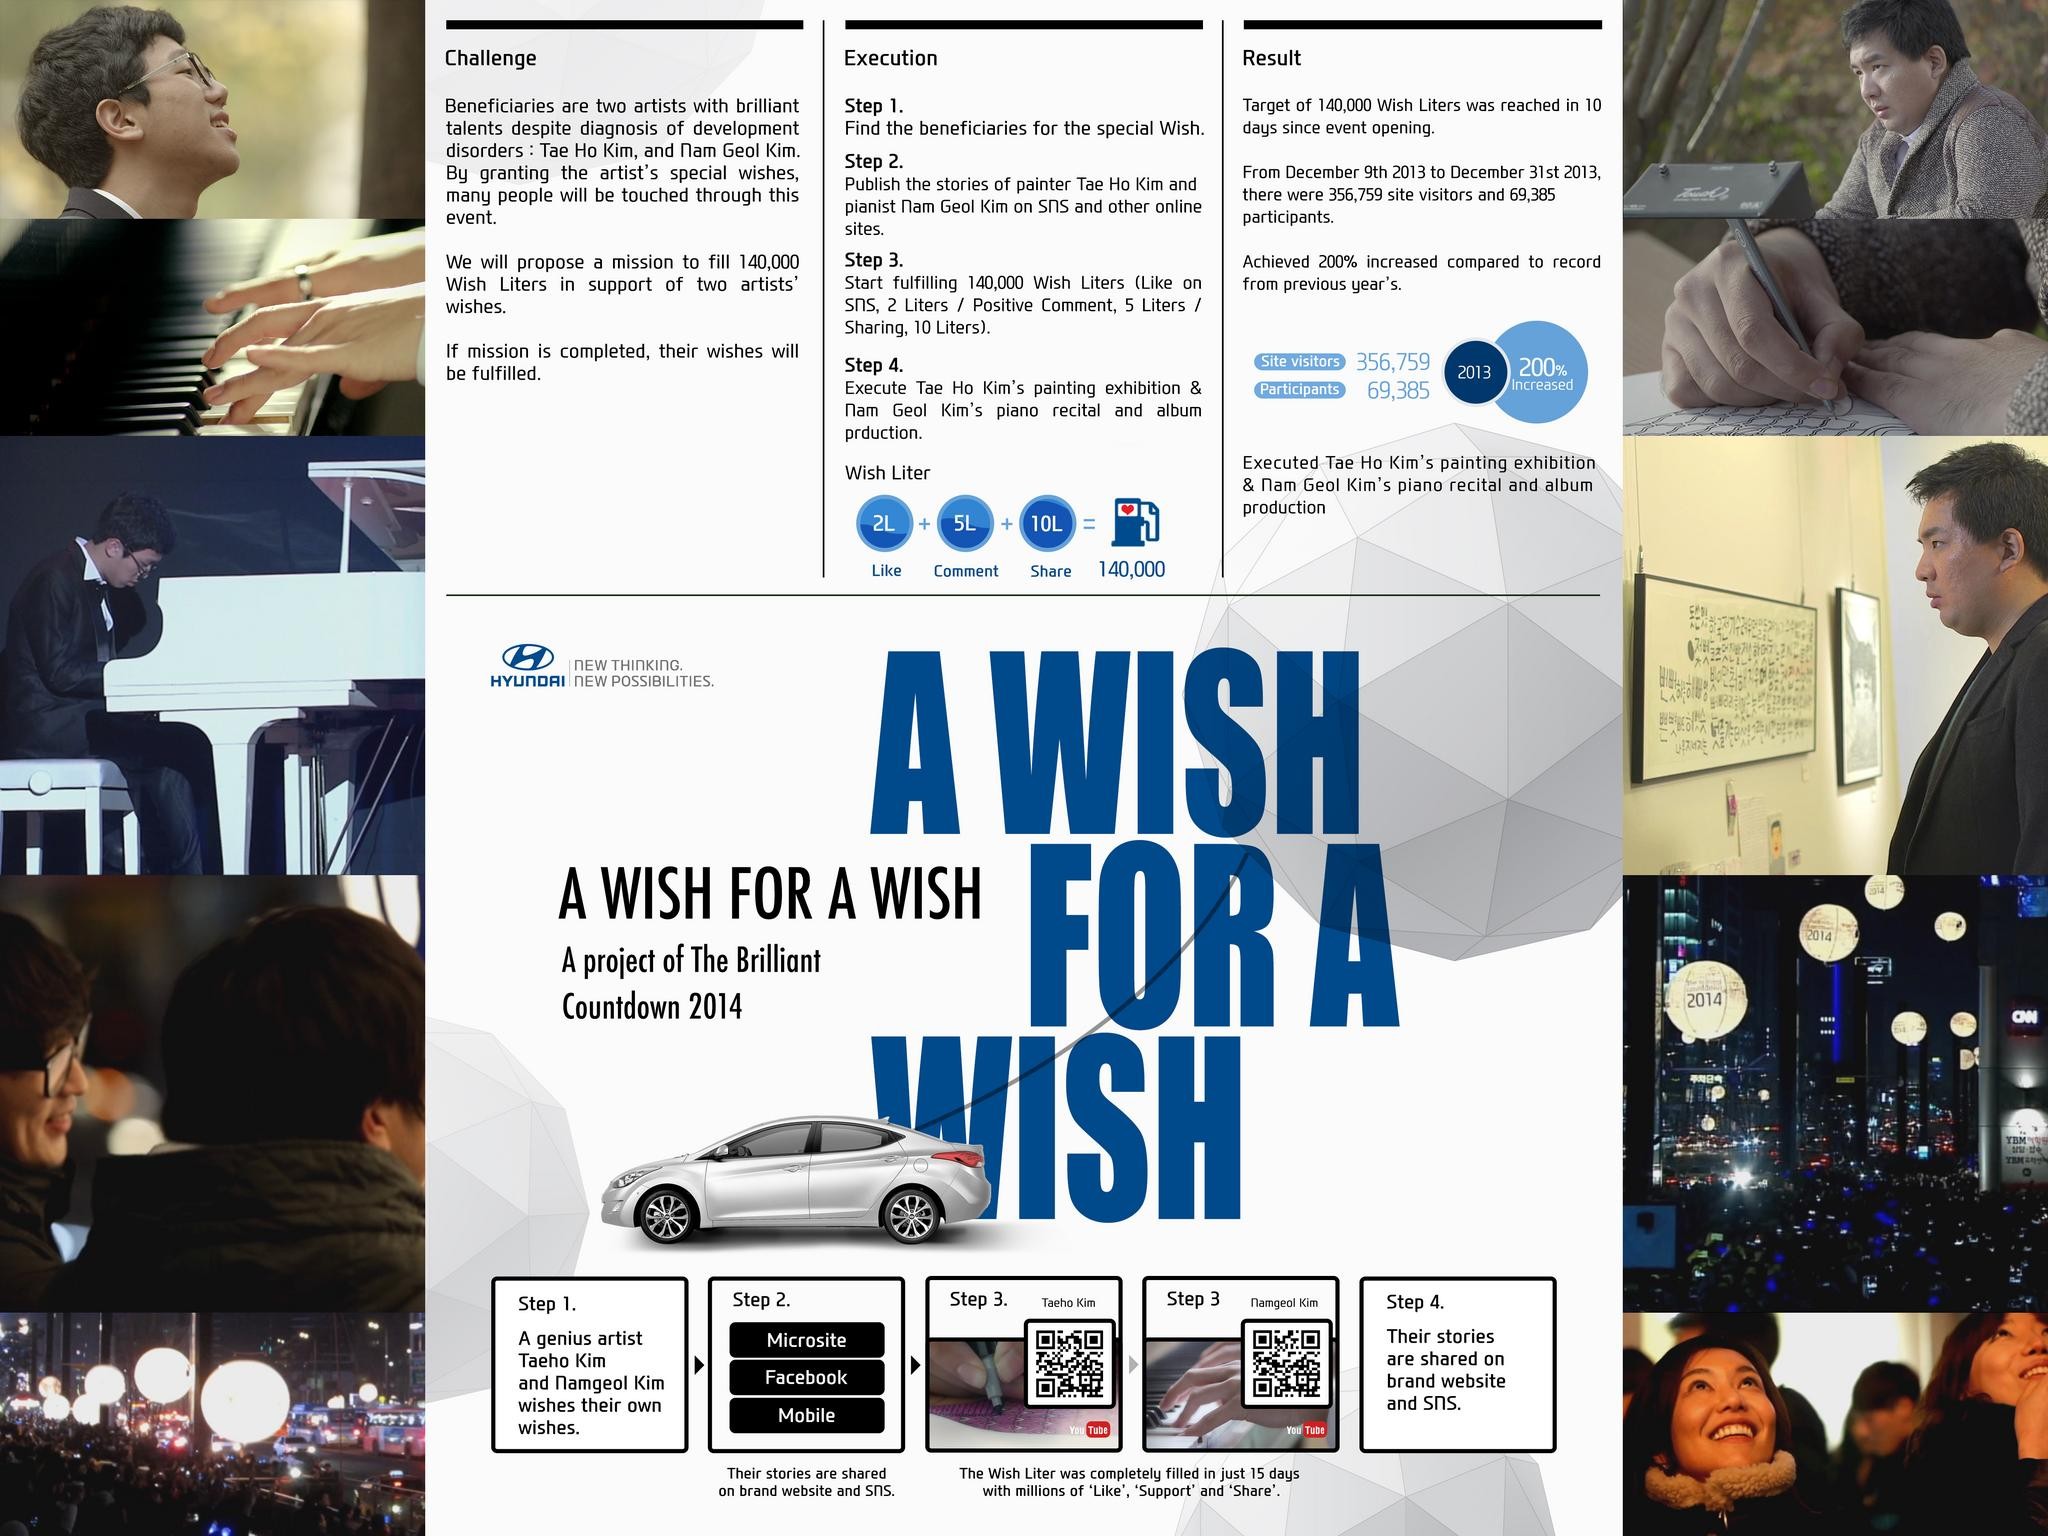 THE BRILLIANT COUNTDOWN 2014 'A WISH FOR A WISH'